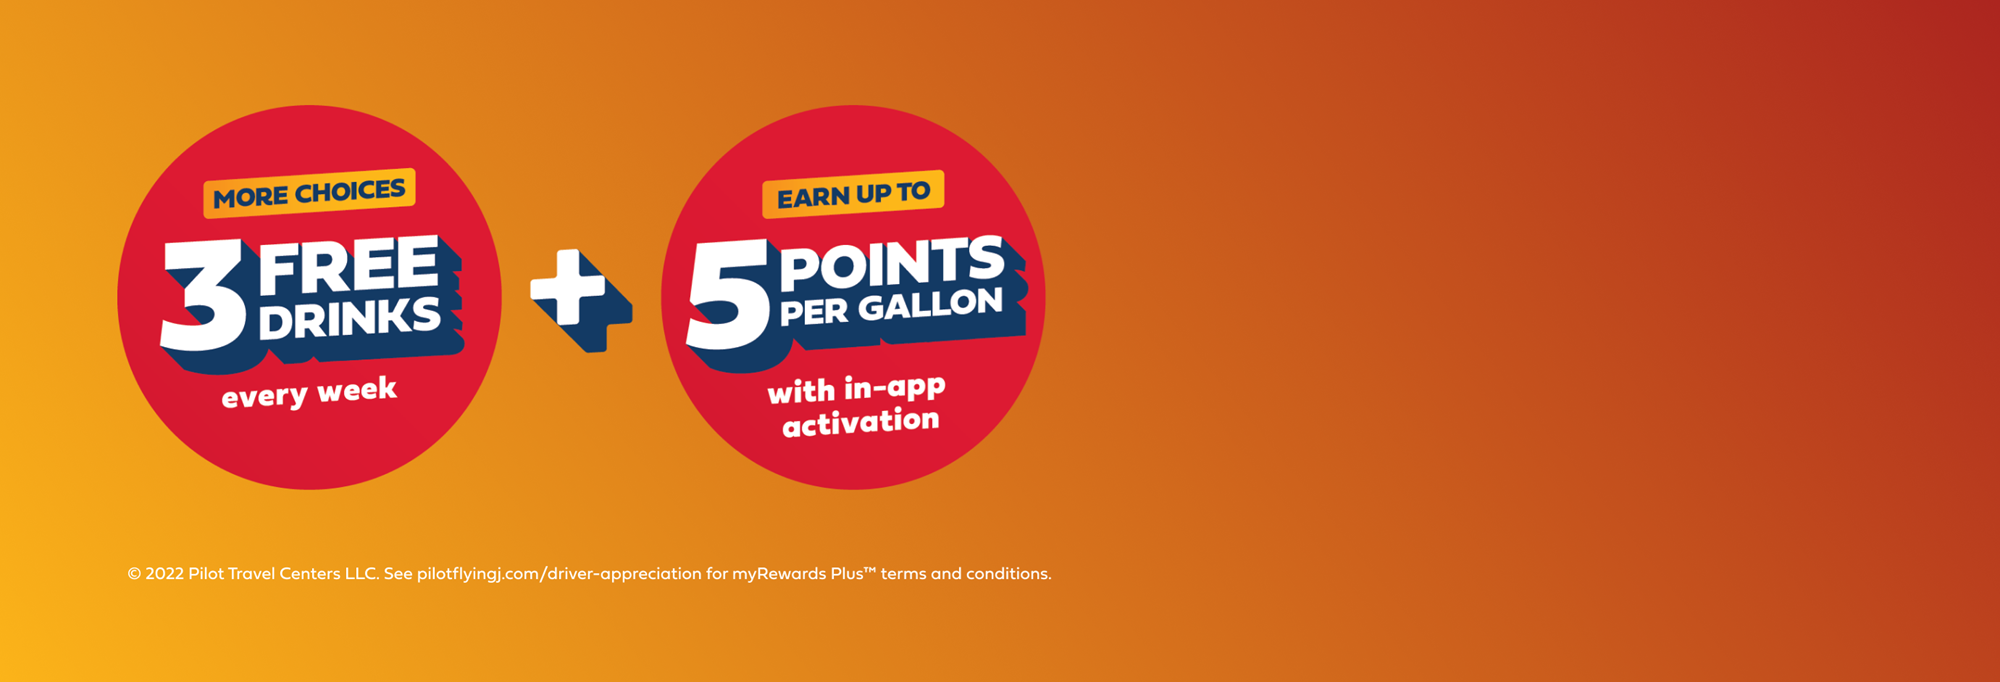 October driver appreciation - 3 free drinks plus earn 5 points per gallon all month long